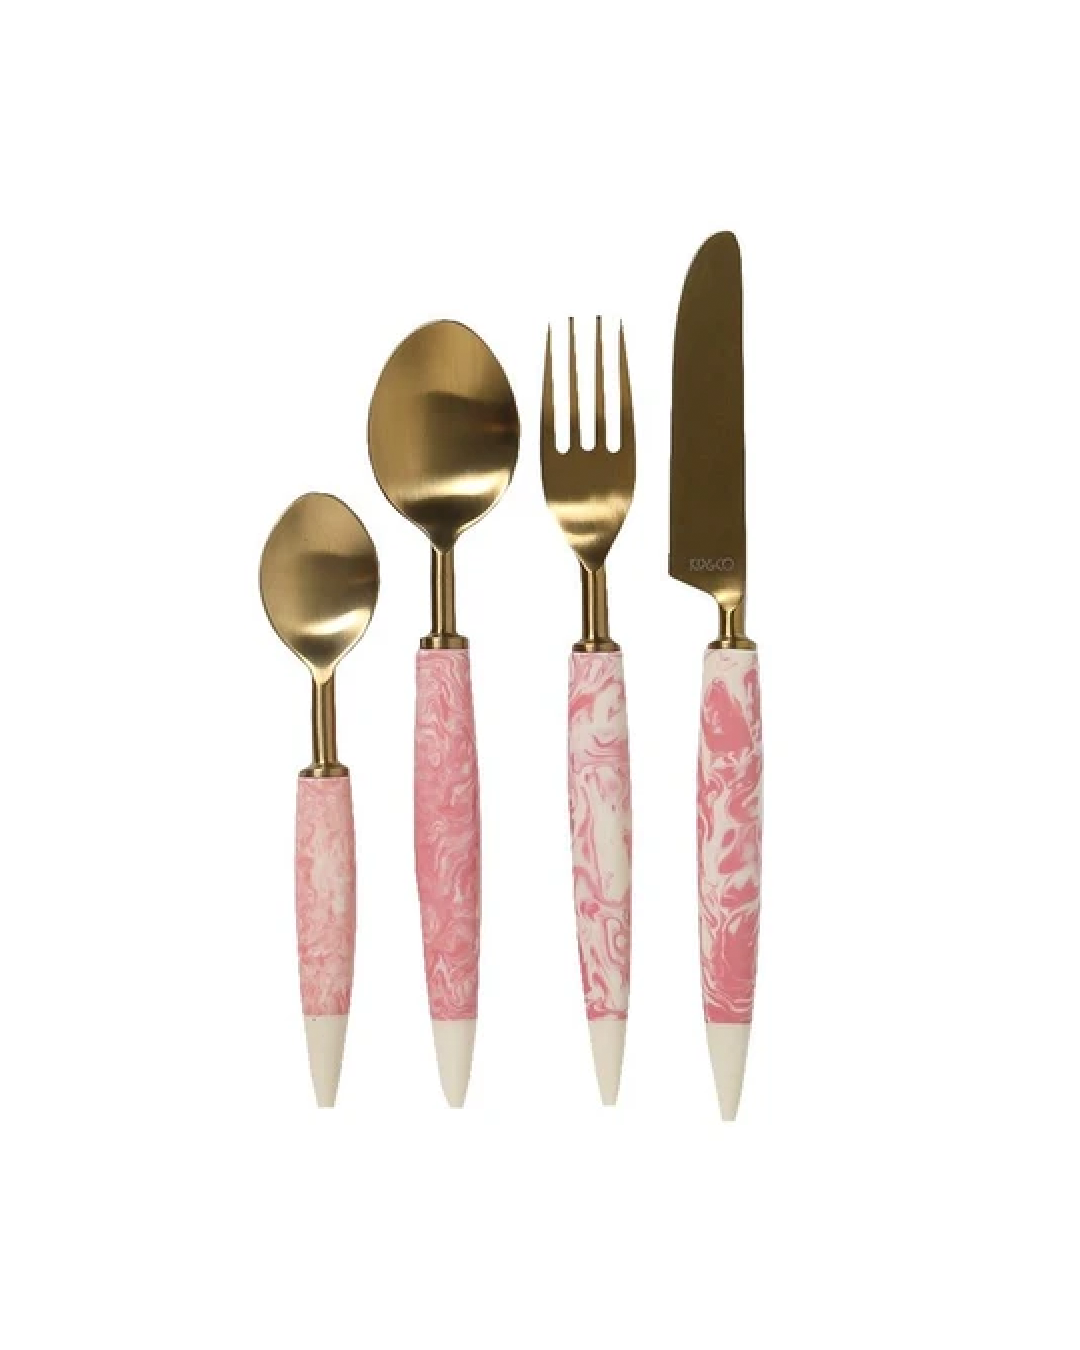 A set of brass cutlery with pink marble handles